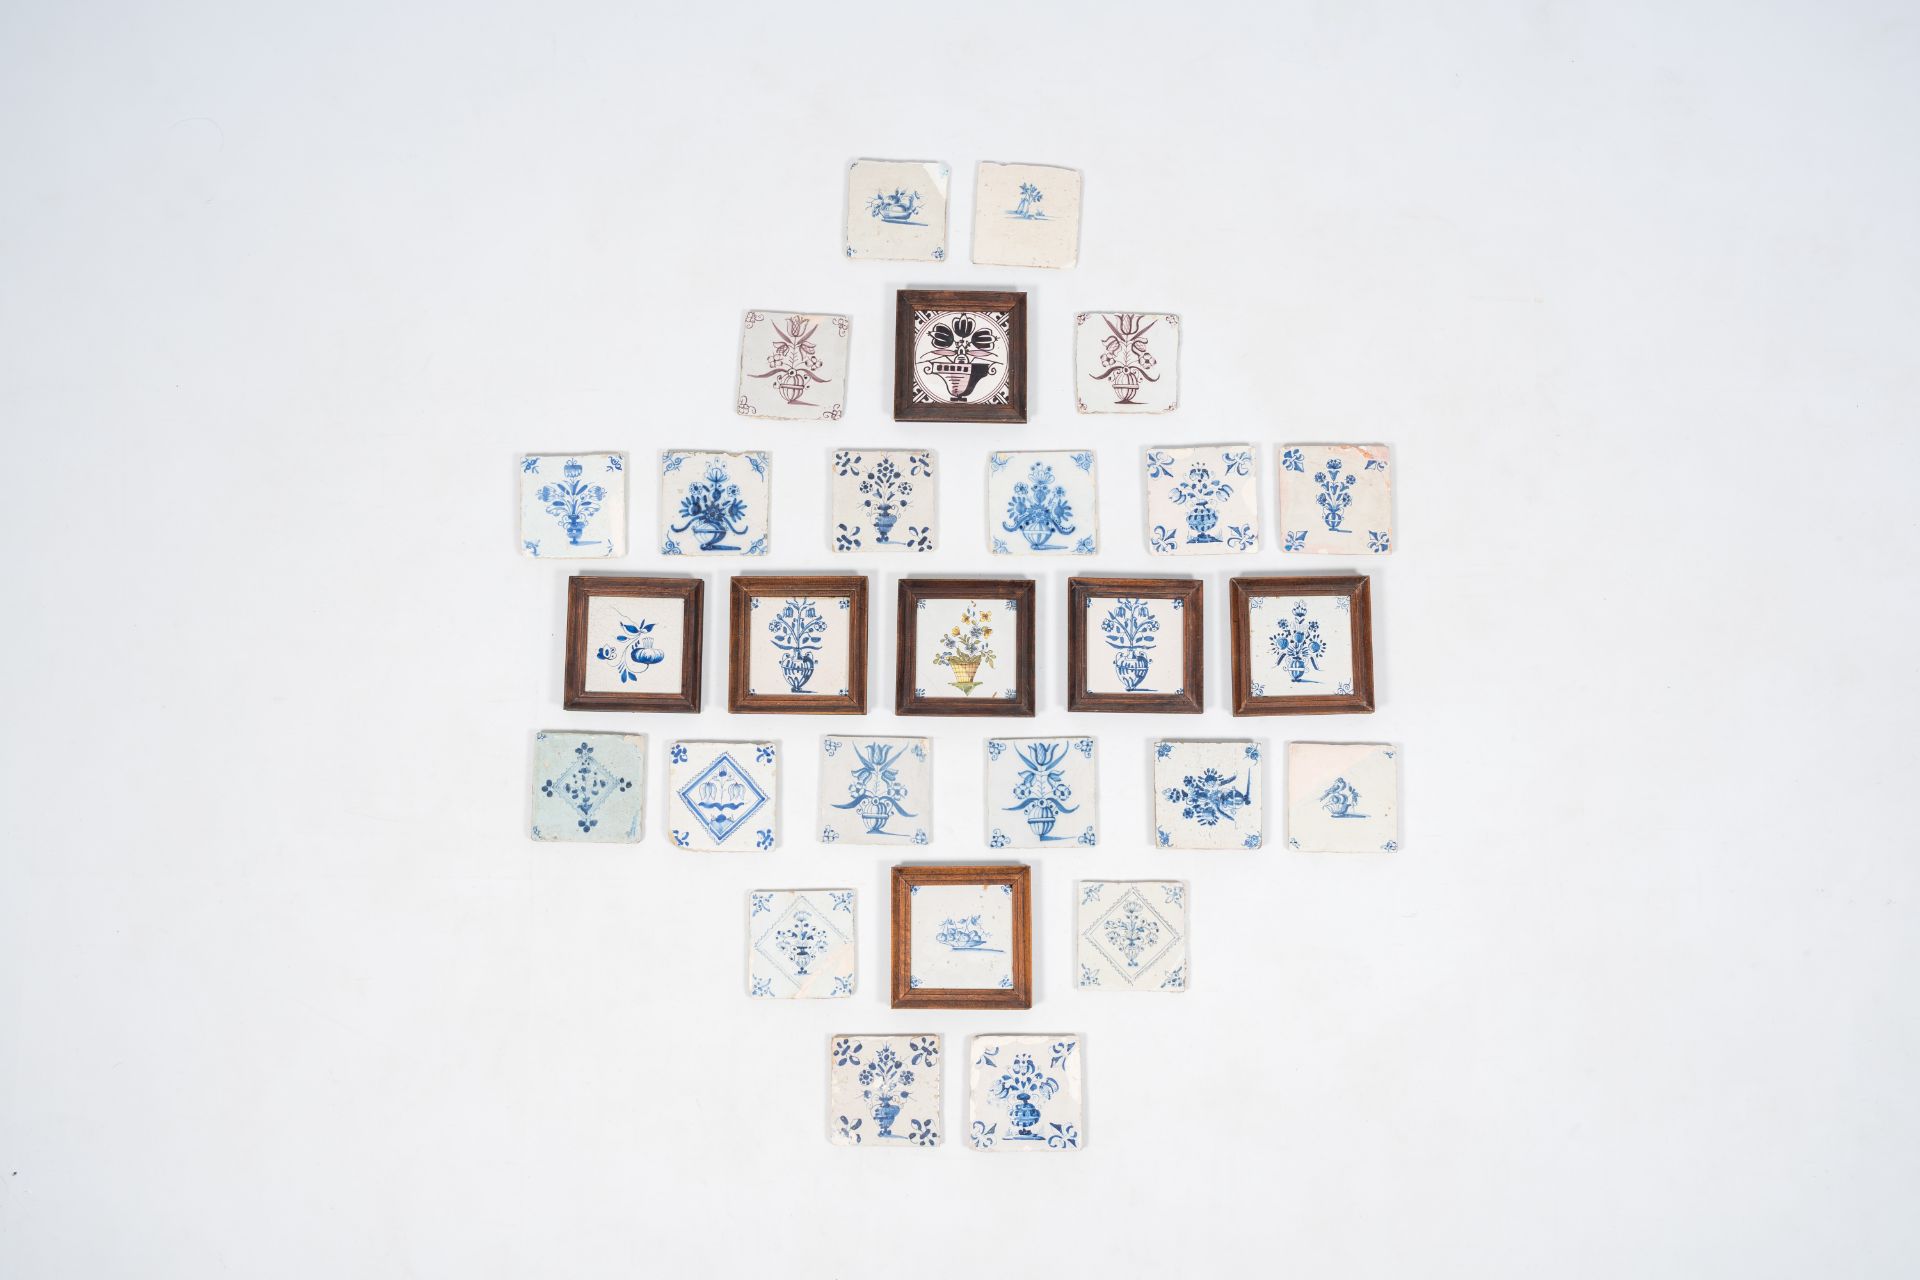 27 blue and white and manganese Dutch Delft tiles with floral designs, 17th/19th C.